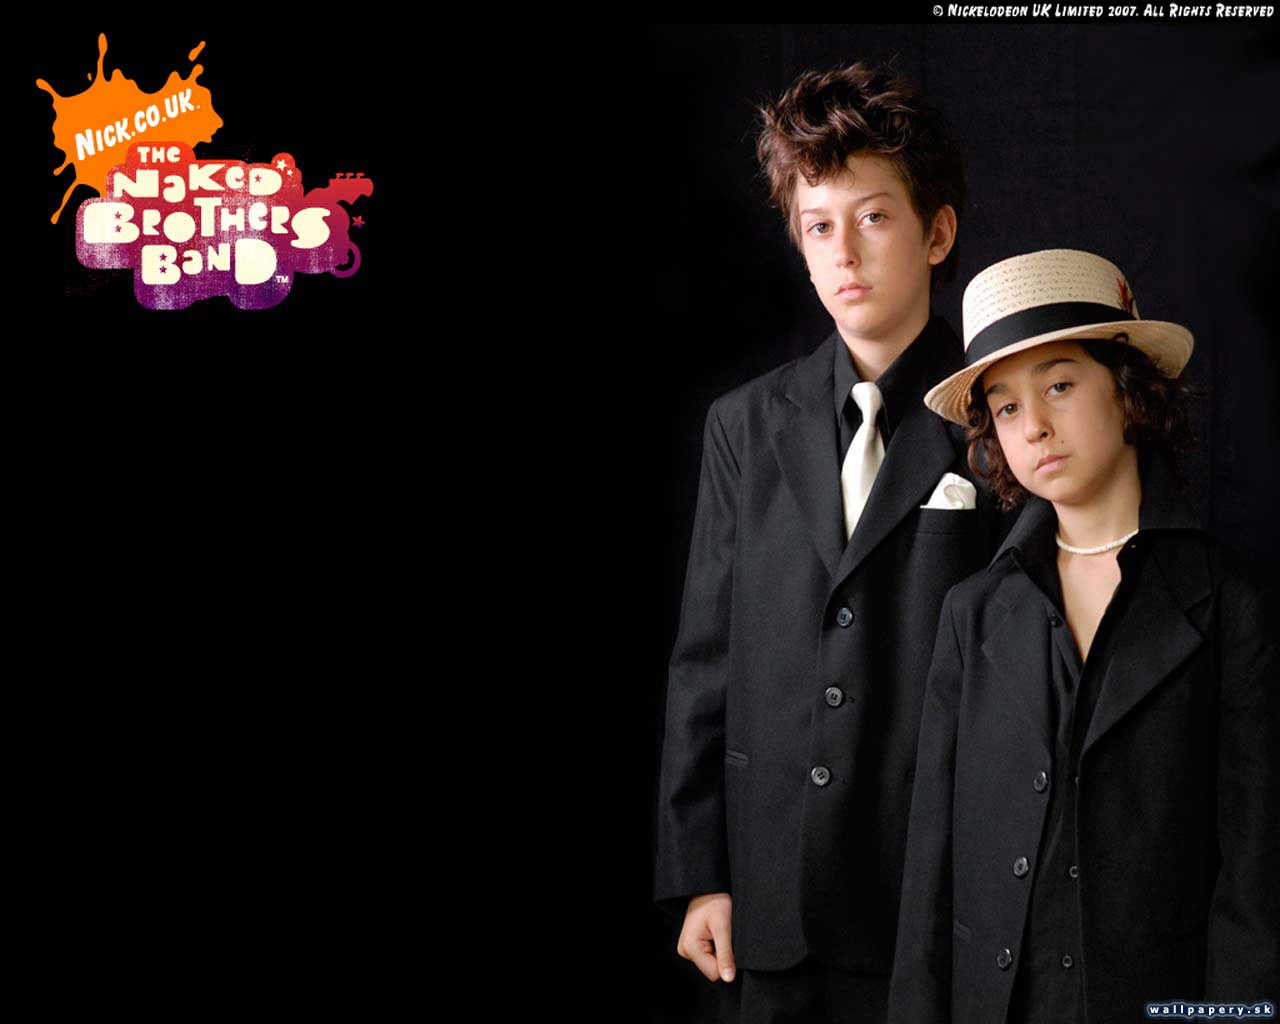 The Naked Brothers Band: The Video Game - wallpaper 6